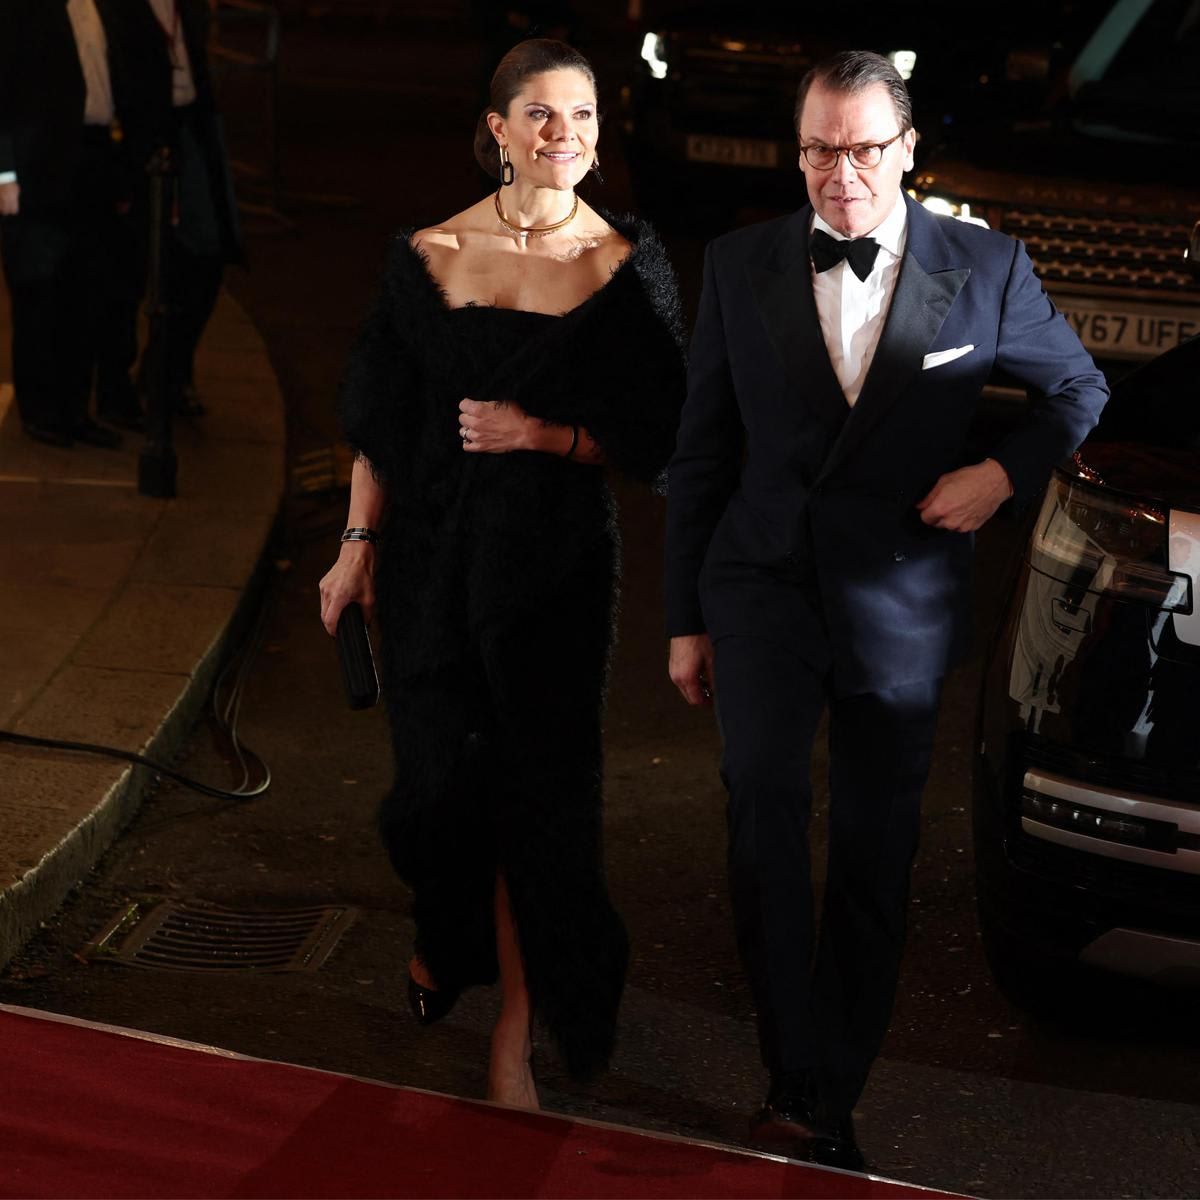 Crown Princess Victoria and Prince Daniel accompanied the Waleses to the variety show in London